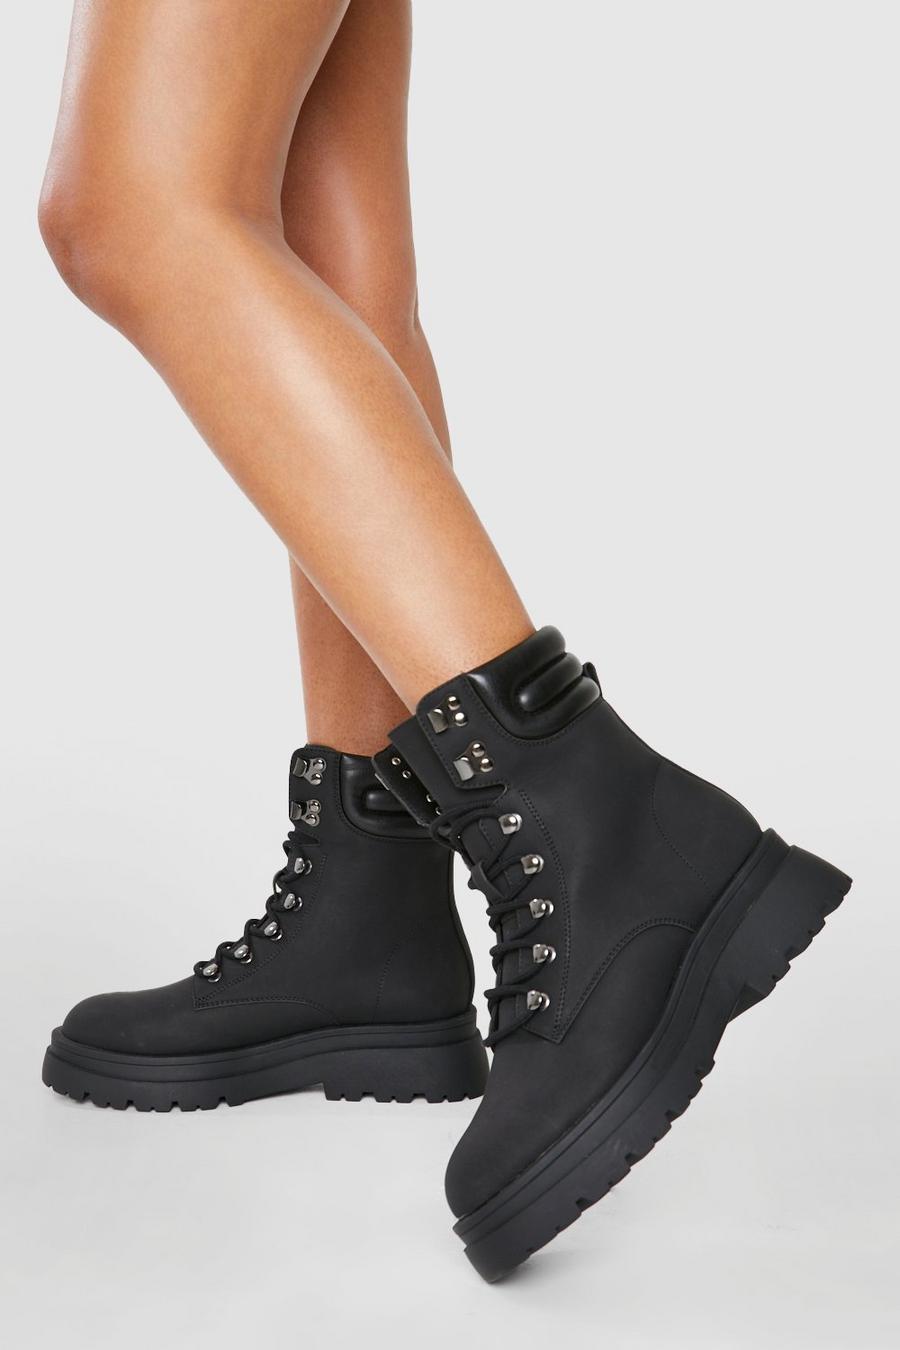 Black noir Cleated Sole Lace Up Hiker Boots